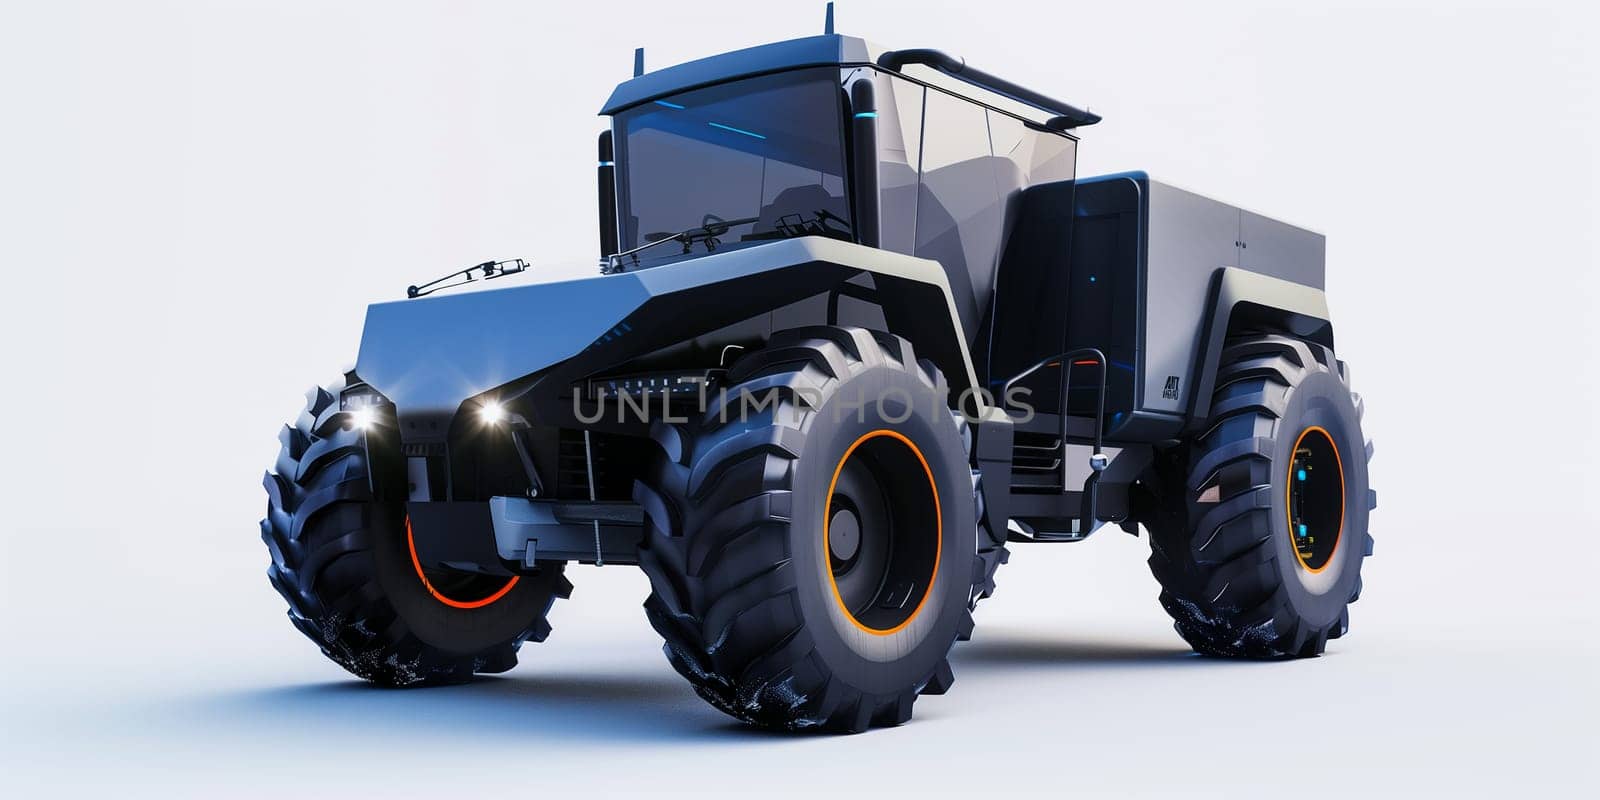 Modern Agriculture Tractor. A powerful vehicle used for various farm tasks, including plowing, tilling, planting, and transportation. by sarymsakov